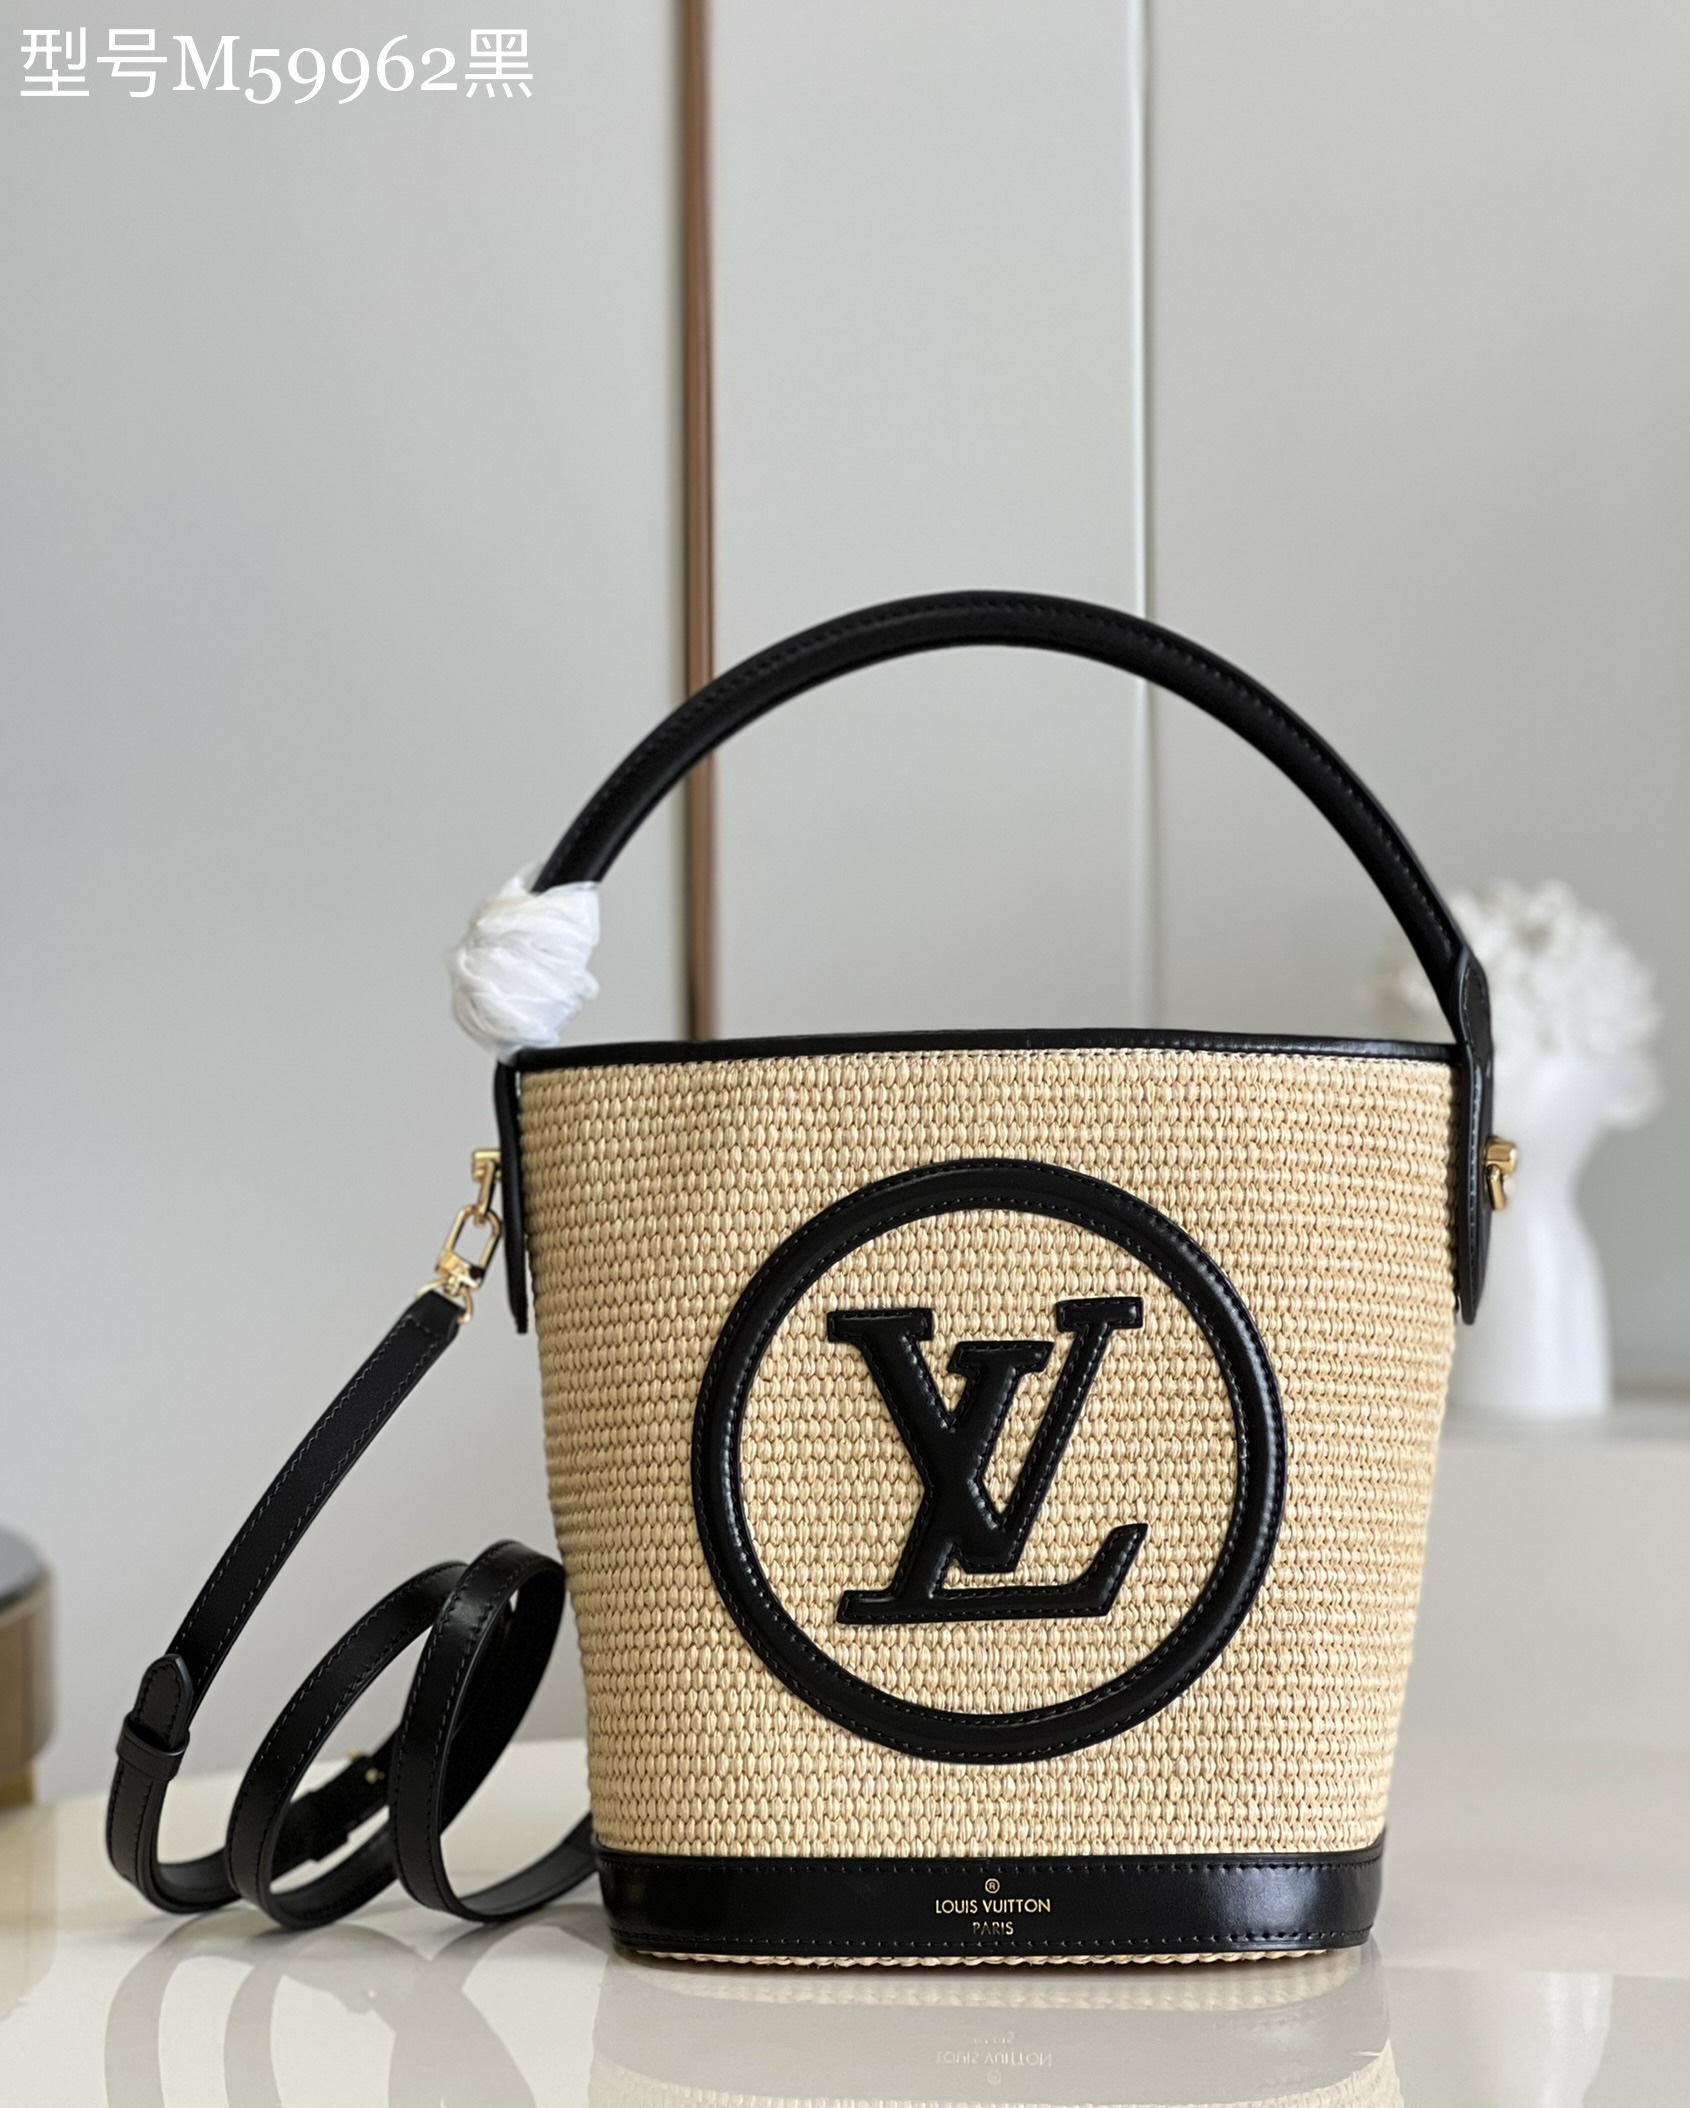 Louis Vuitton Bucket Bags Black Embroidery Weave Summer Collection Fashion Casual M59962